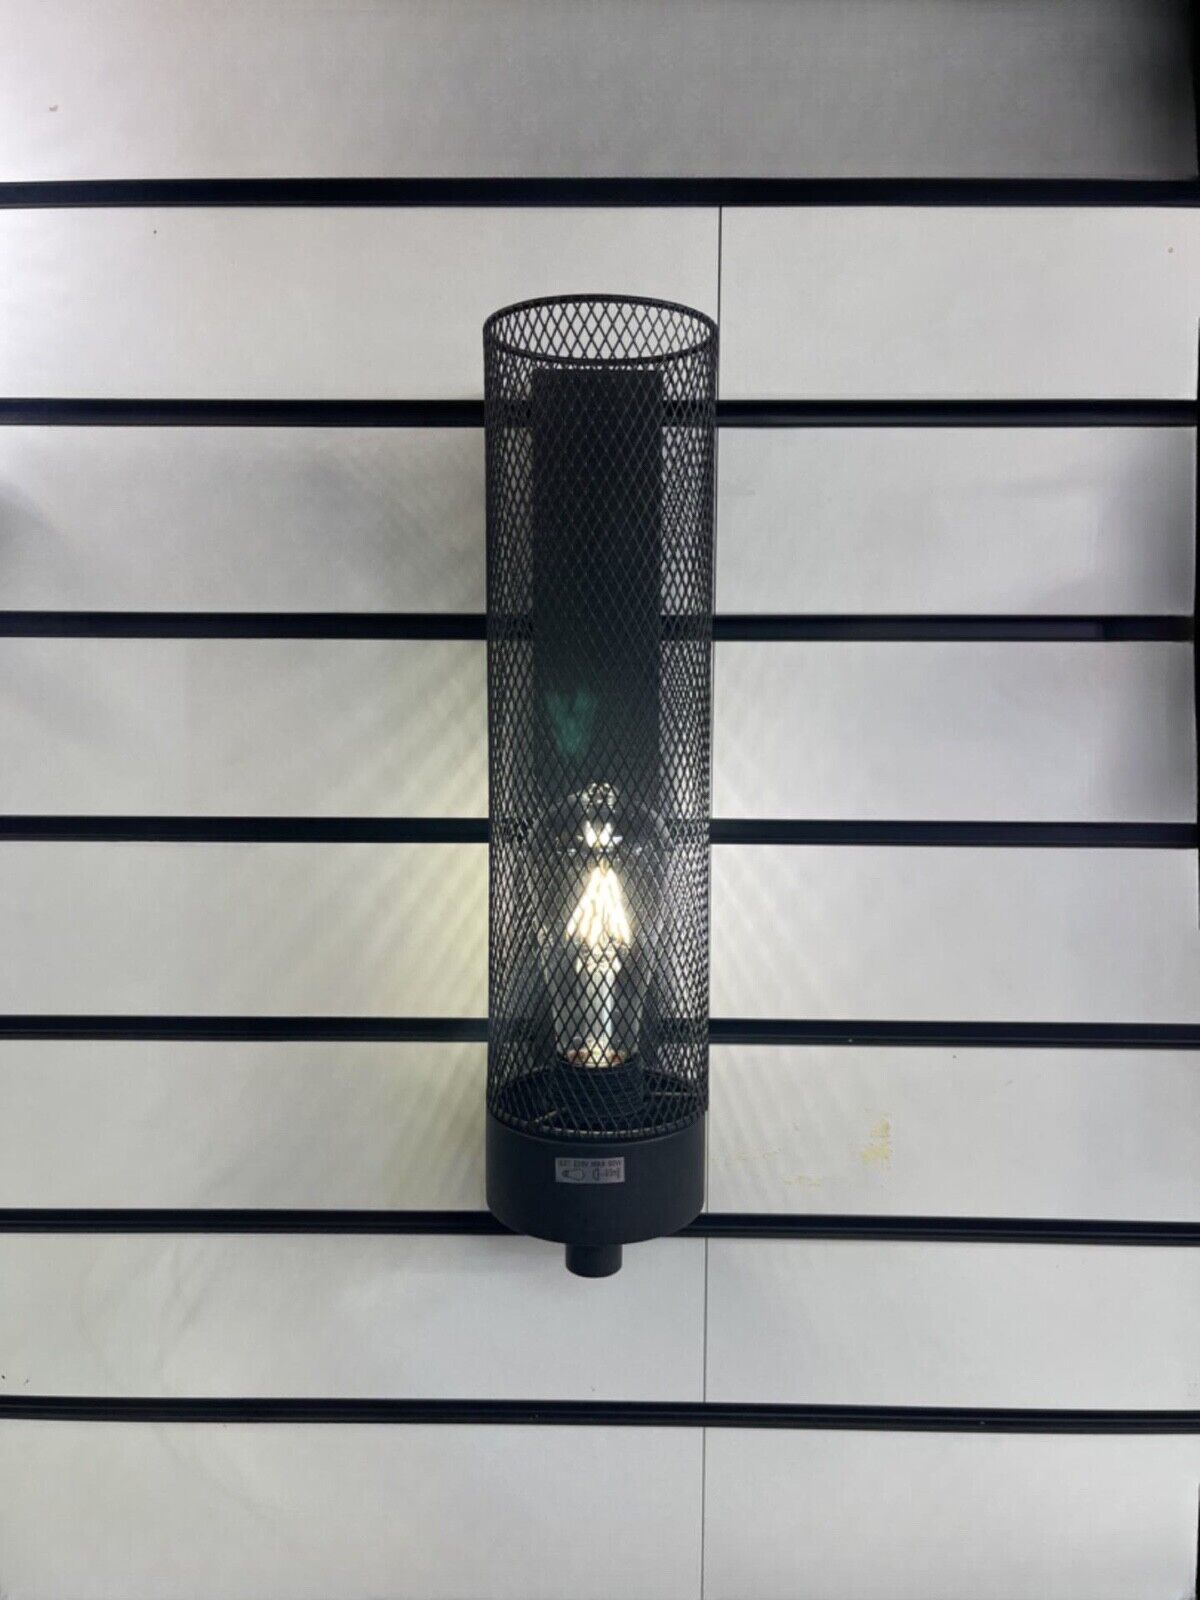 Black Metal Mesh Contemporary Wall Light with On/Off Rocker Switch - Light fixtures UK